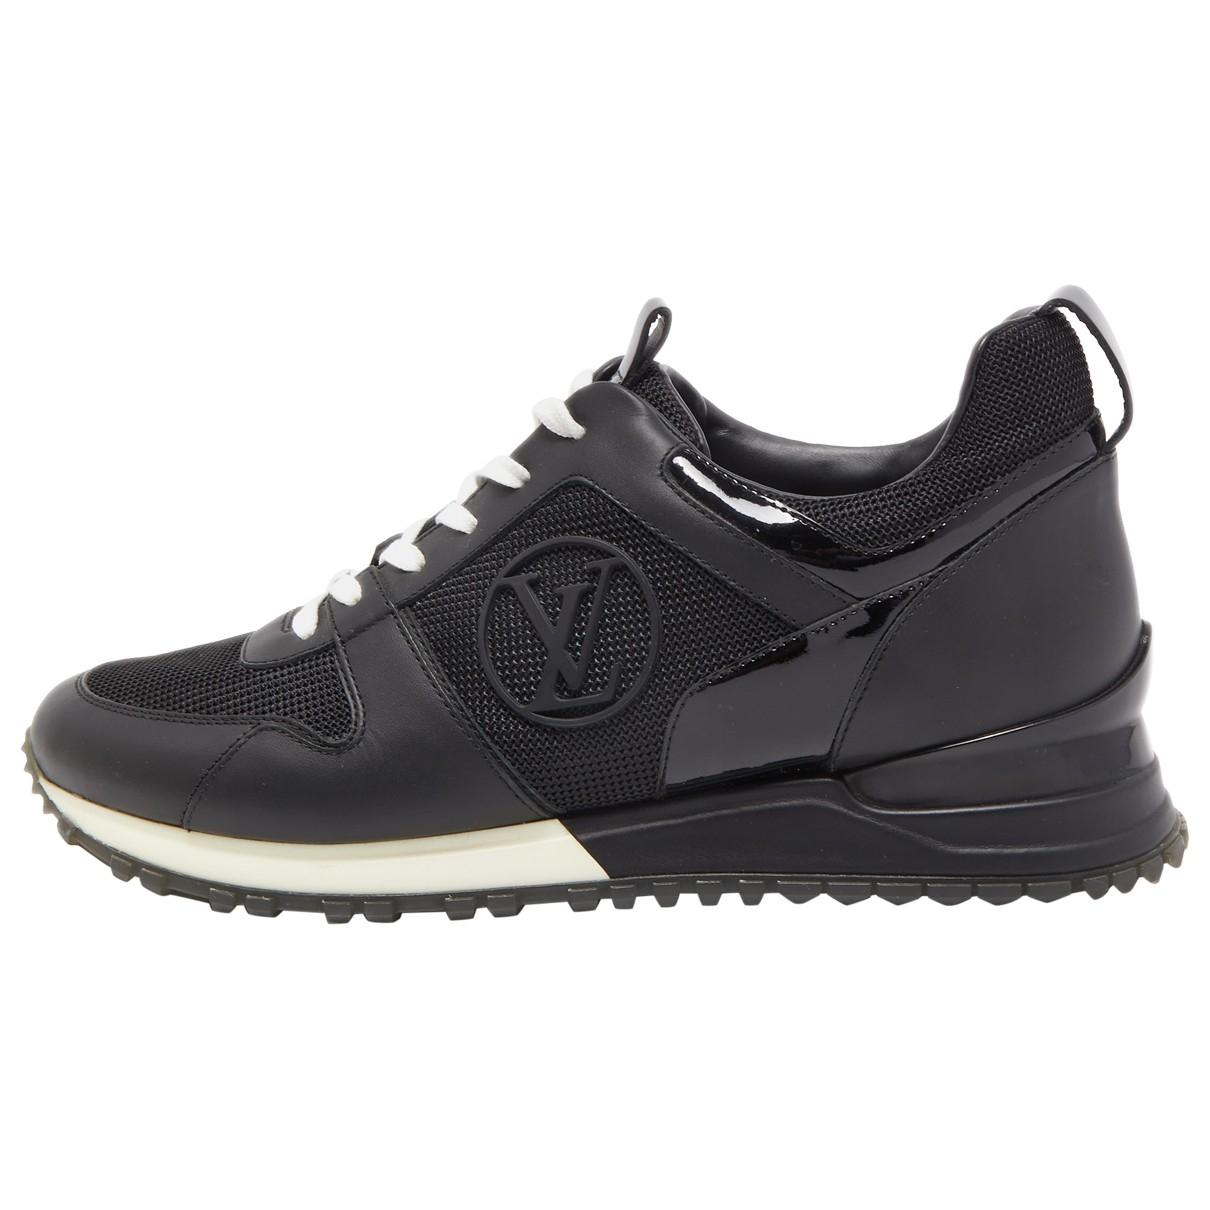 Run away leather trainers Louis Vuitton Black size 39 EU in Leather -  31515206